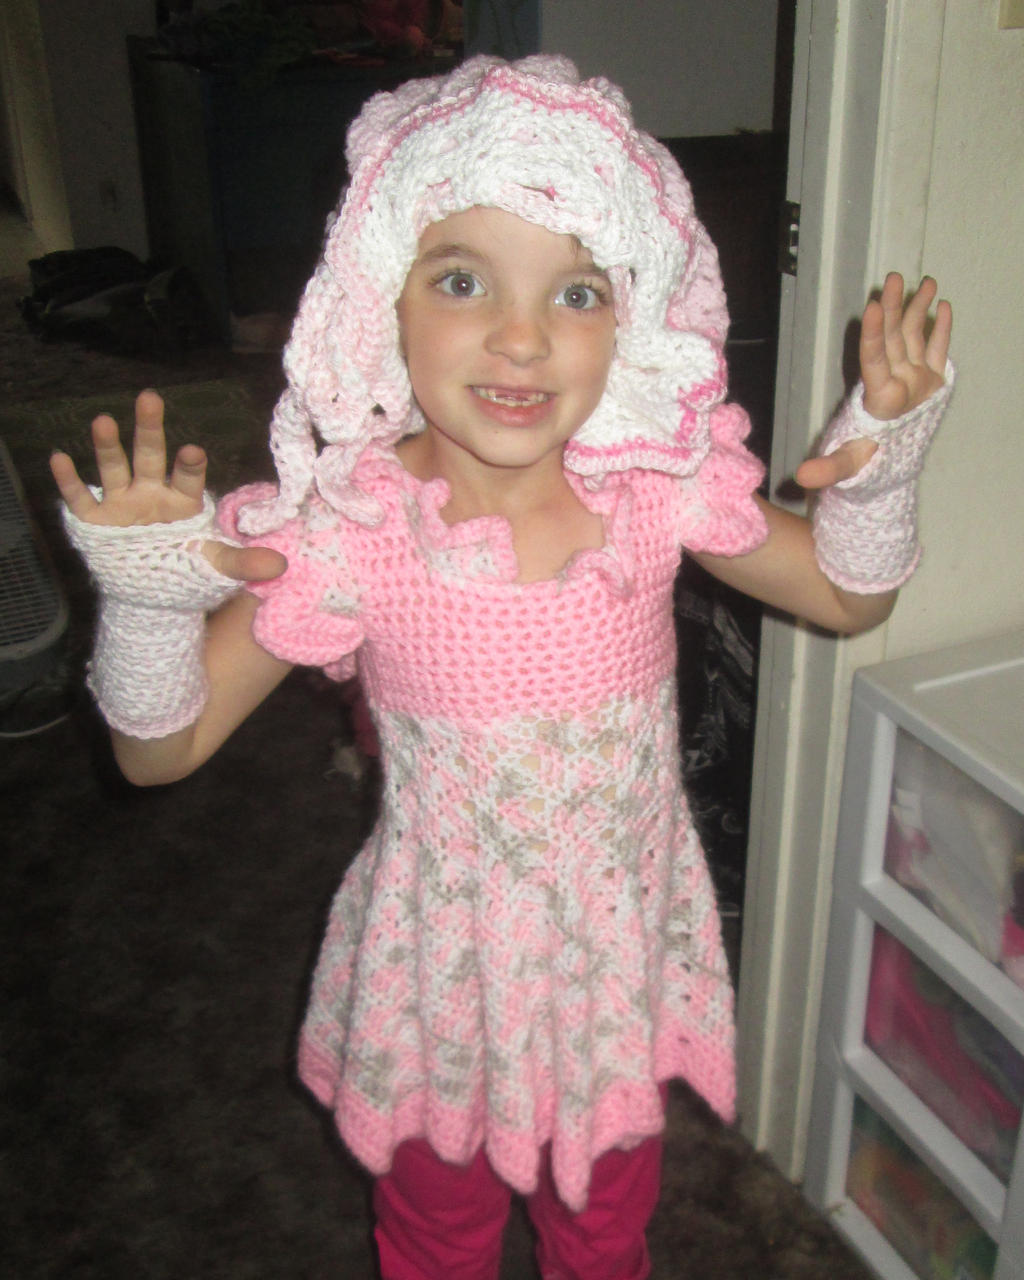 Fiona's new pink outfit...crochet